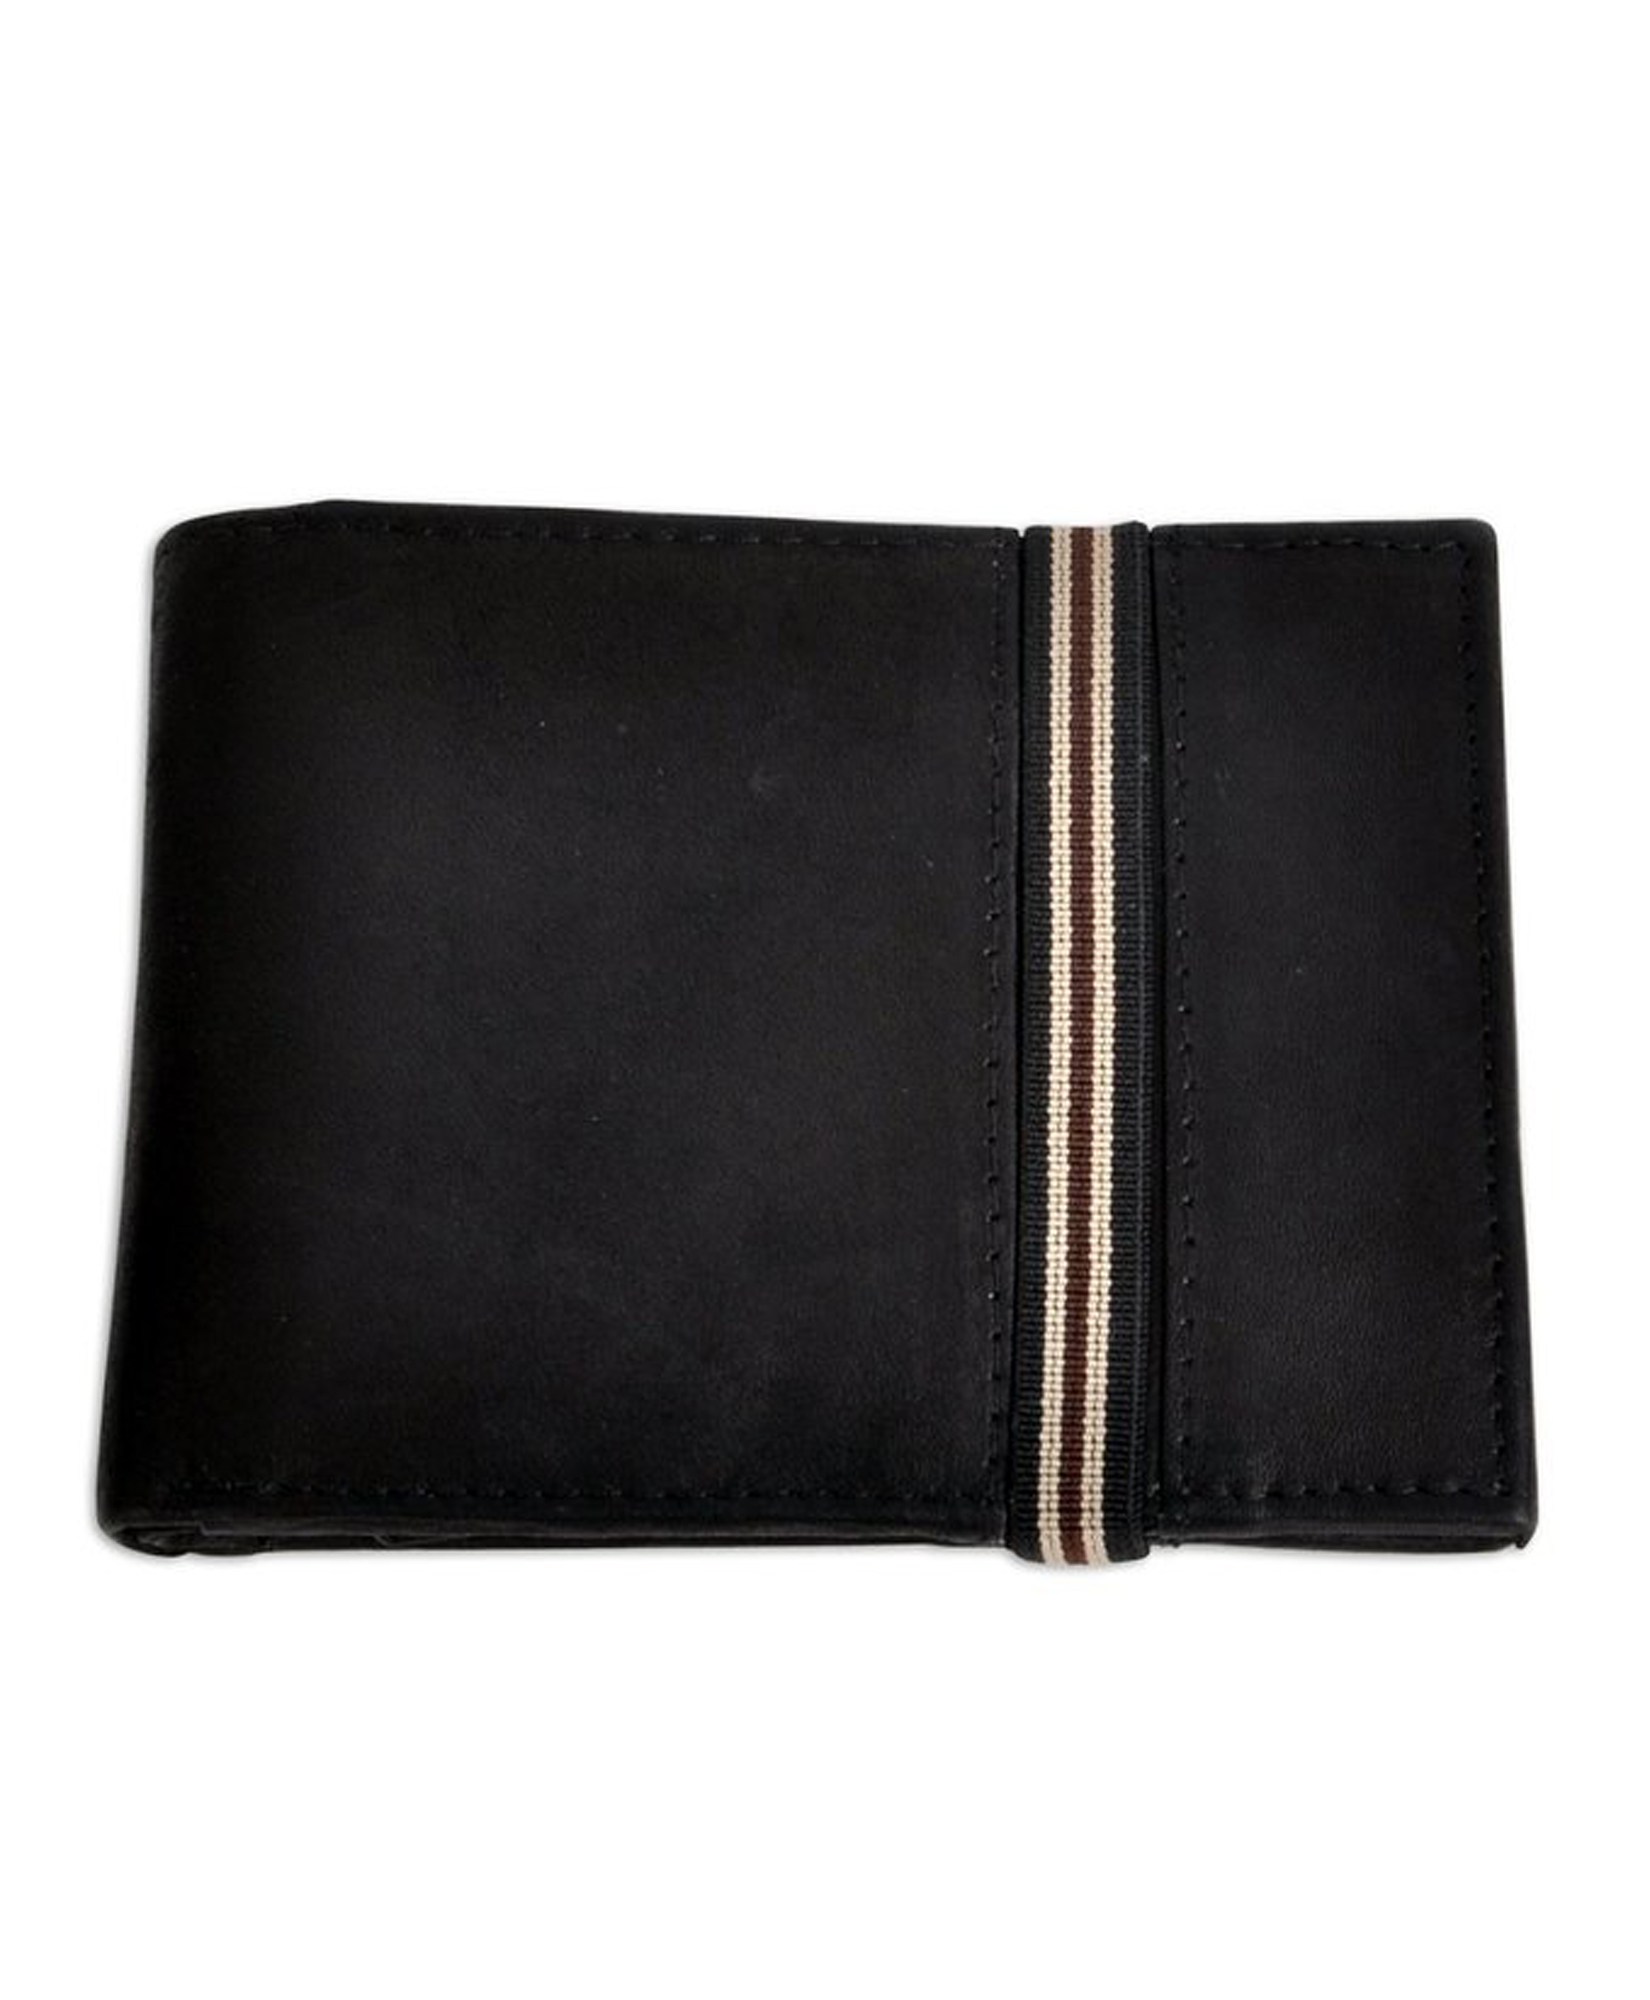 Selini NY Men's Bi-Fold Genuine Leather Wallet with Elastic Band Fastening | Shop Your Way 